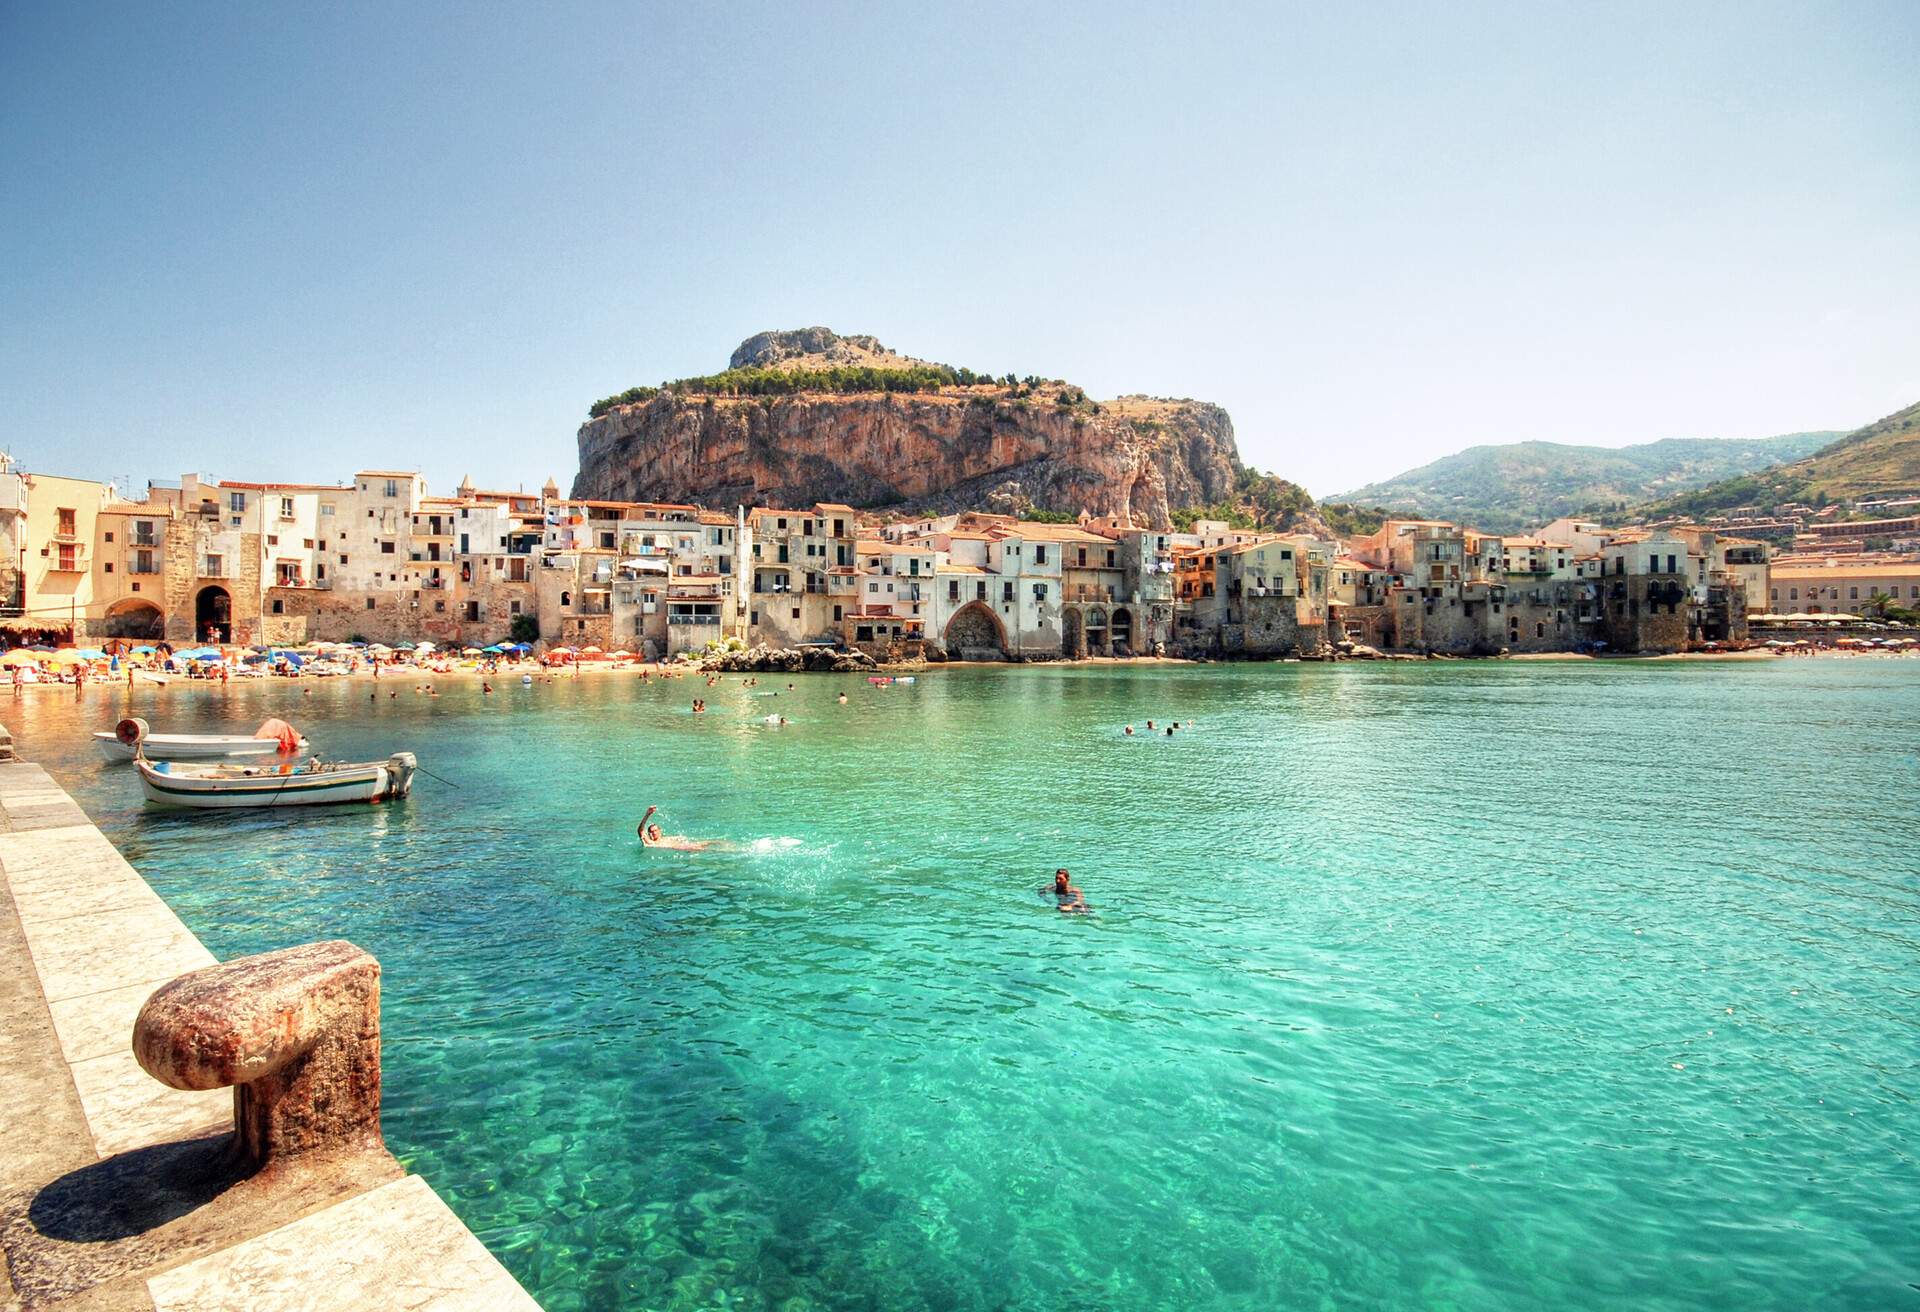 DEST_ITALY_SICILY_CEFALU_THEME_BEACH_GettyImages-142116239